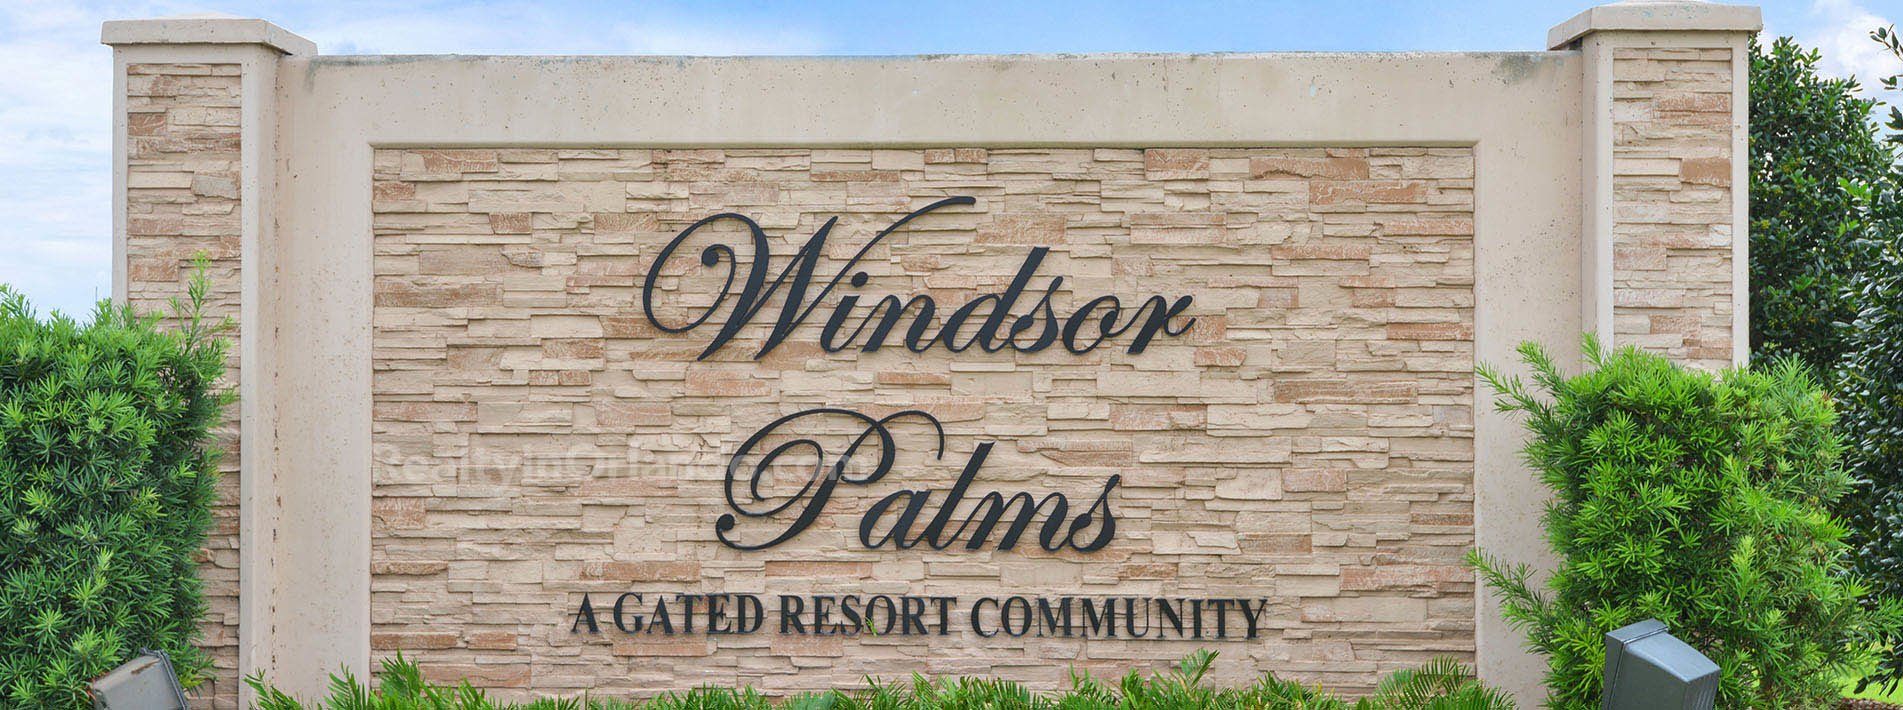 Windsor Palms Kissimmee Real Estate